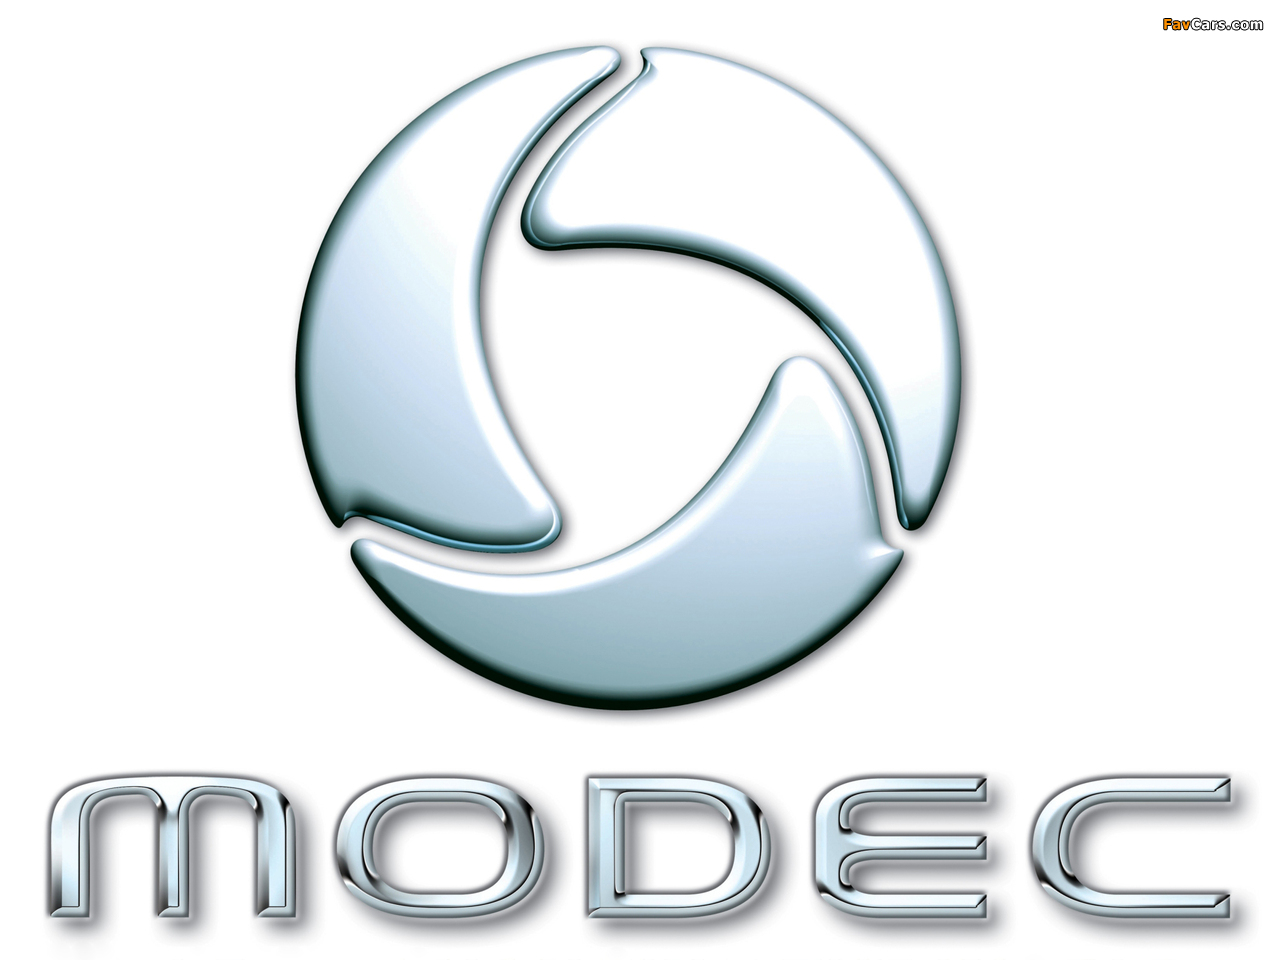 Modec wallpapers (1280 x 960)